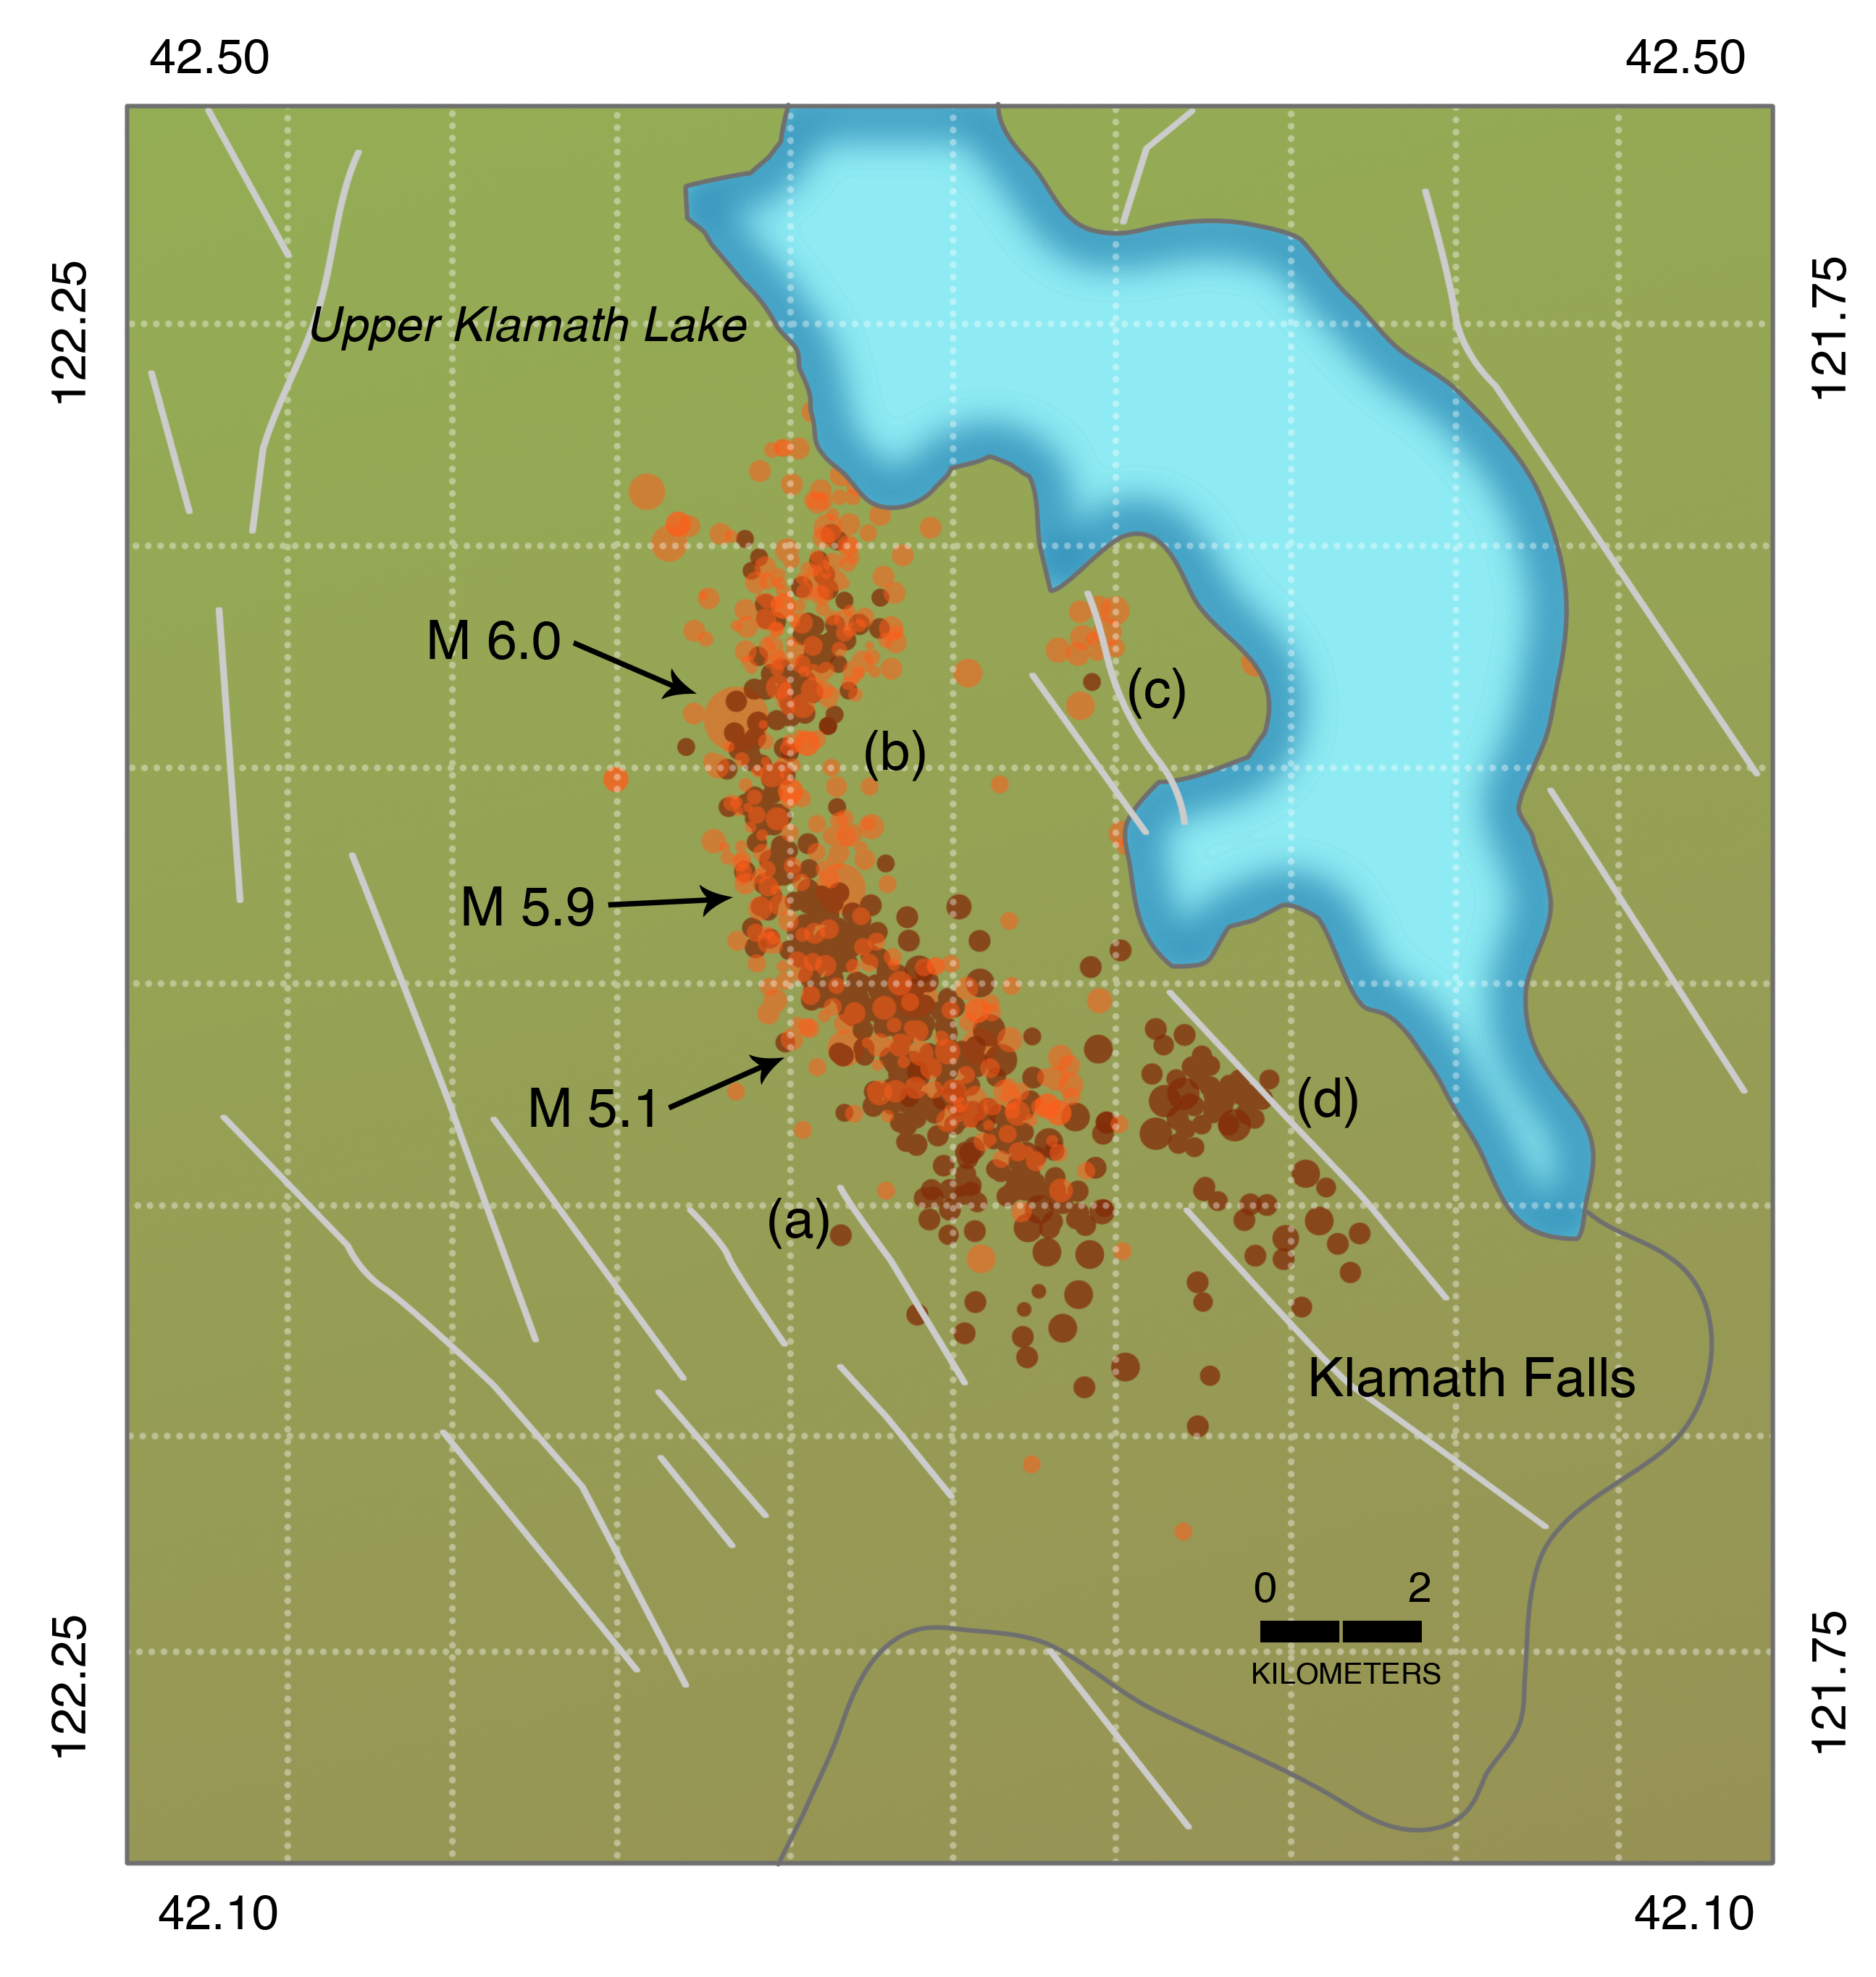 Earthquakes and aftershocks of the Klamath Falls earthquake sequence, September-December, 1993